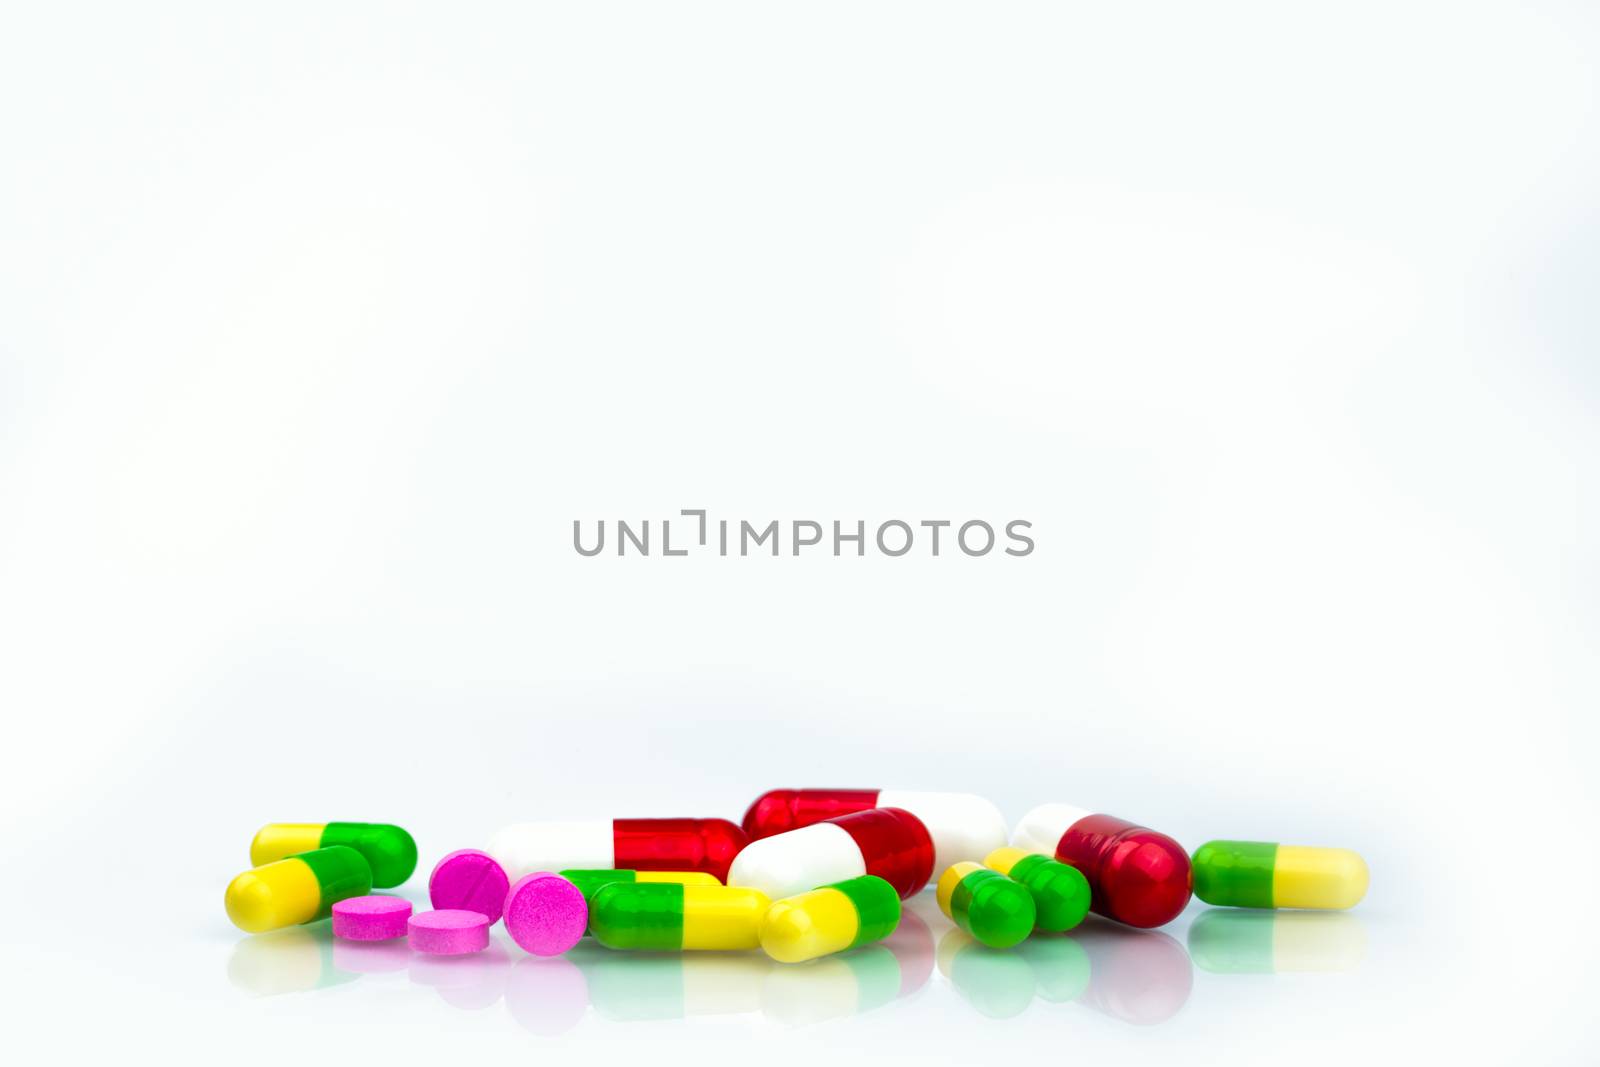 Pile of colorful capsule and tablets pills on white background with copy space for text. Pharmacy department in the hospital concept. Drug store concept. Pharmaceutical industry. Pharmacy background. Global healthcare concept.